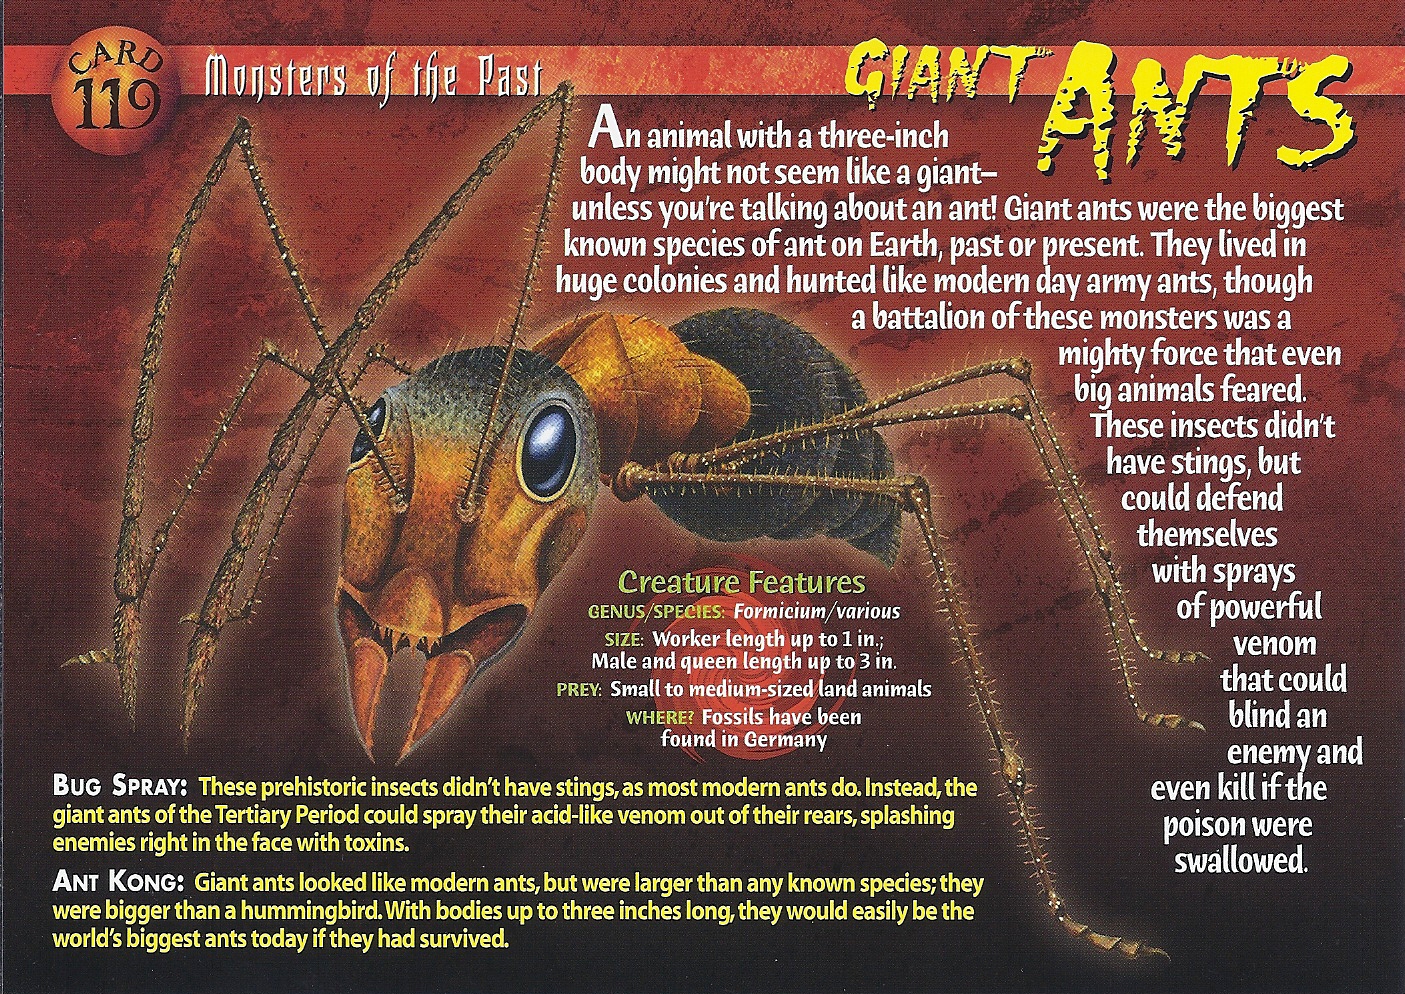 https://static.wikia.nocookie.net/wierdnwildcreatures/images/b/bd/Giant_Ants_front.jpg/revision/latest?cb=20130828025135